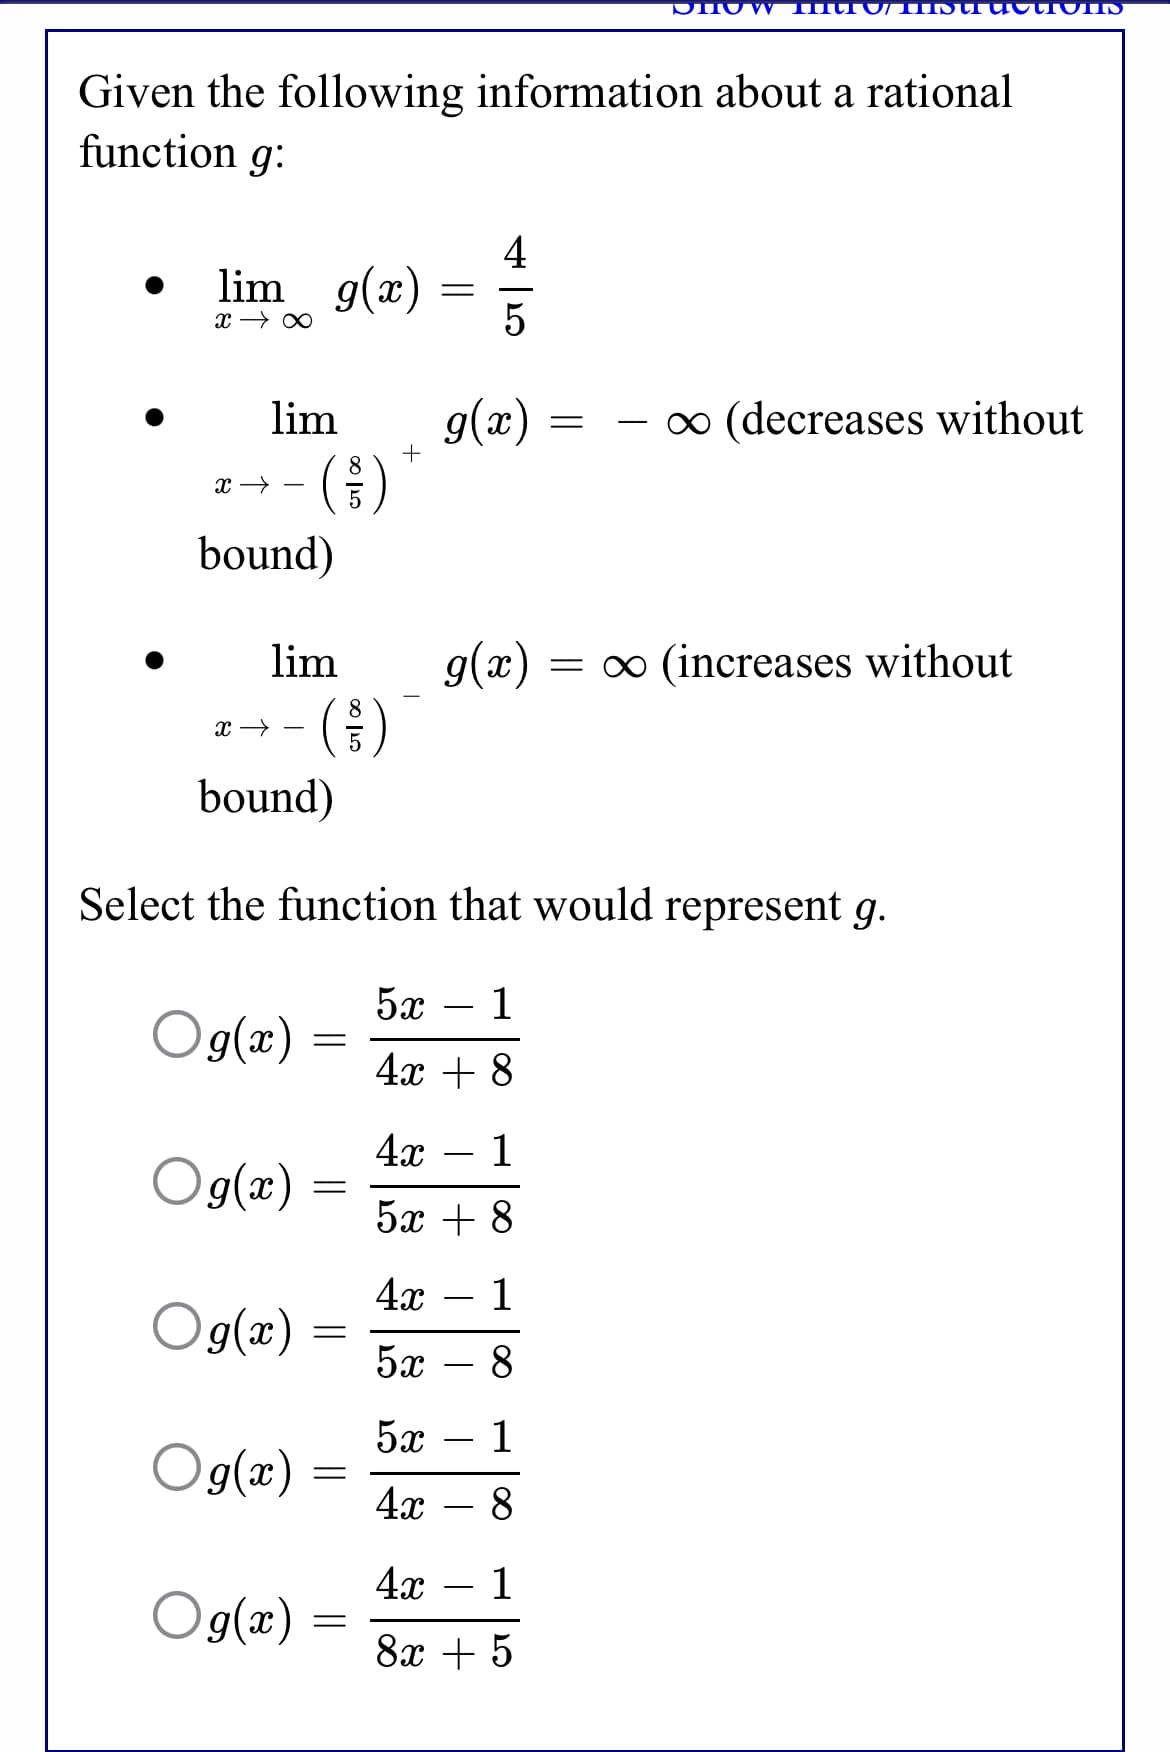 Given the following information about a rational
function g:
4
lim g(x)
g(x)
( )
lim
o (decreases without
-
+
8.
bound)
lim
g(x) :
= 0 (increases without
bound)
Select the function that would represent g.
5х — 1
Og(æ)
4x + 8
4x
1
Og(æ)
5х + 8
4x – 1
Og(æ) :
5x
8
5x
1
Og(æ)
4х — 8
4х — 1
Og(æ)
8x + 5
